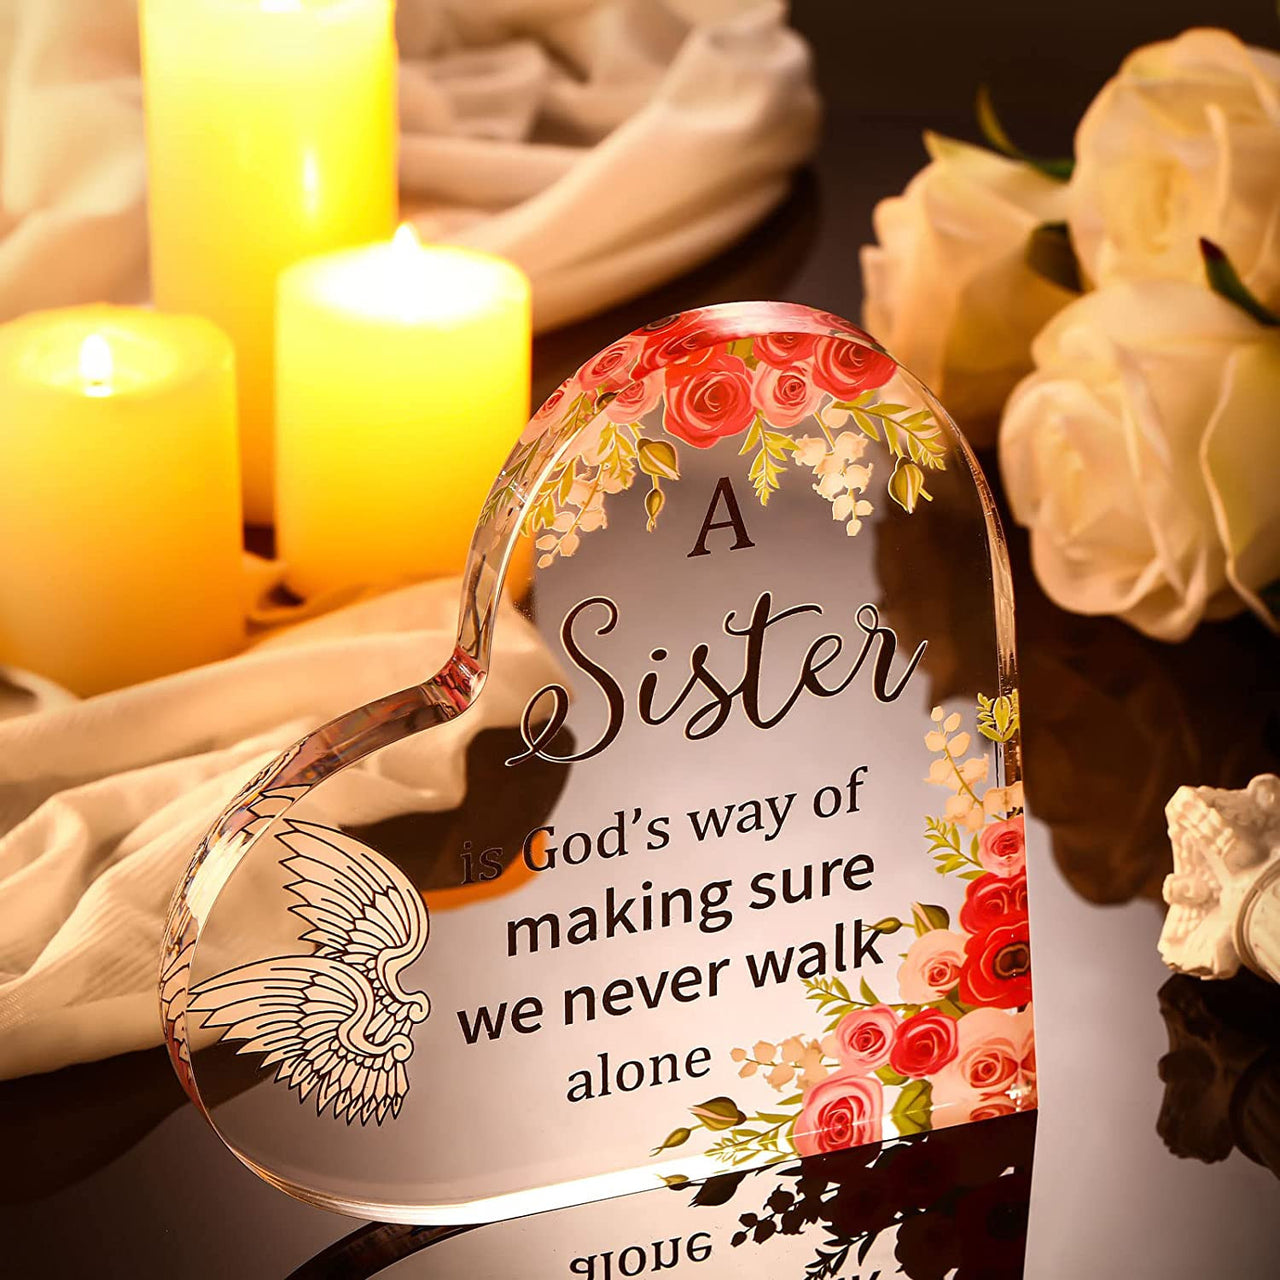 Yulejo Heart Sister - Gift from Sister - Keepsake, Paperweight, a Sister is God's Way of Making Sure We Never Walk Alone